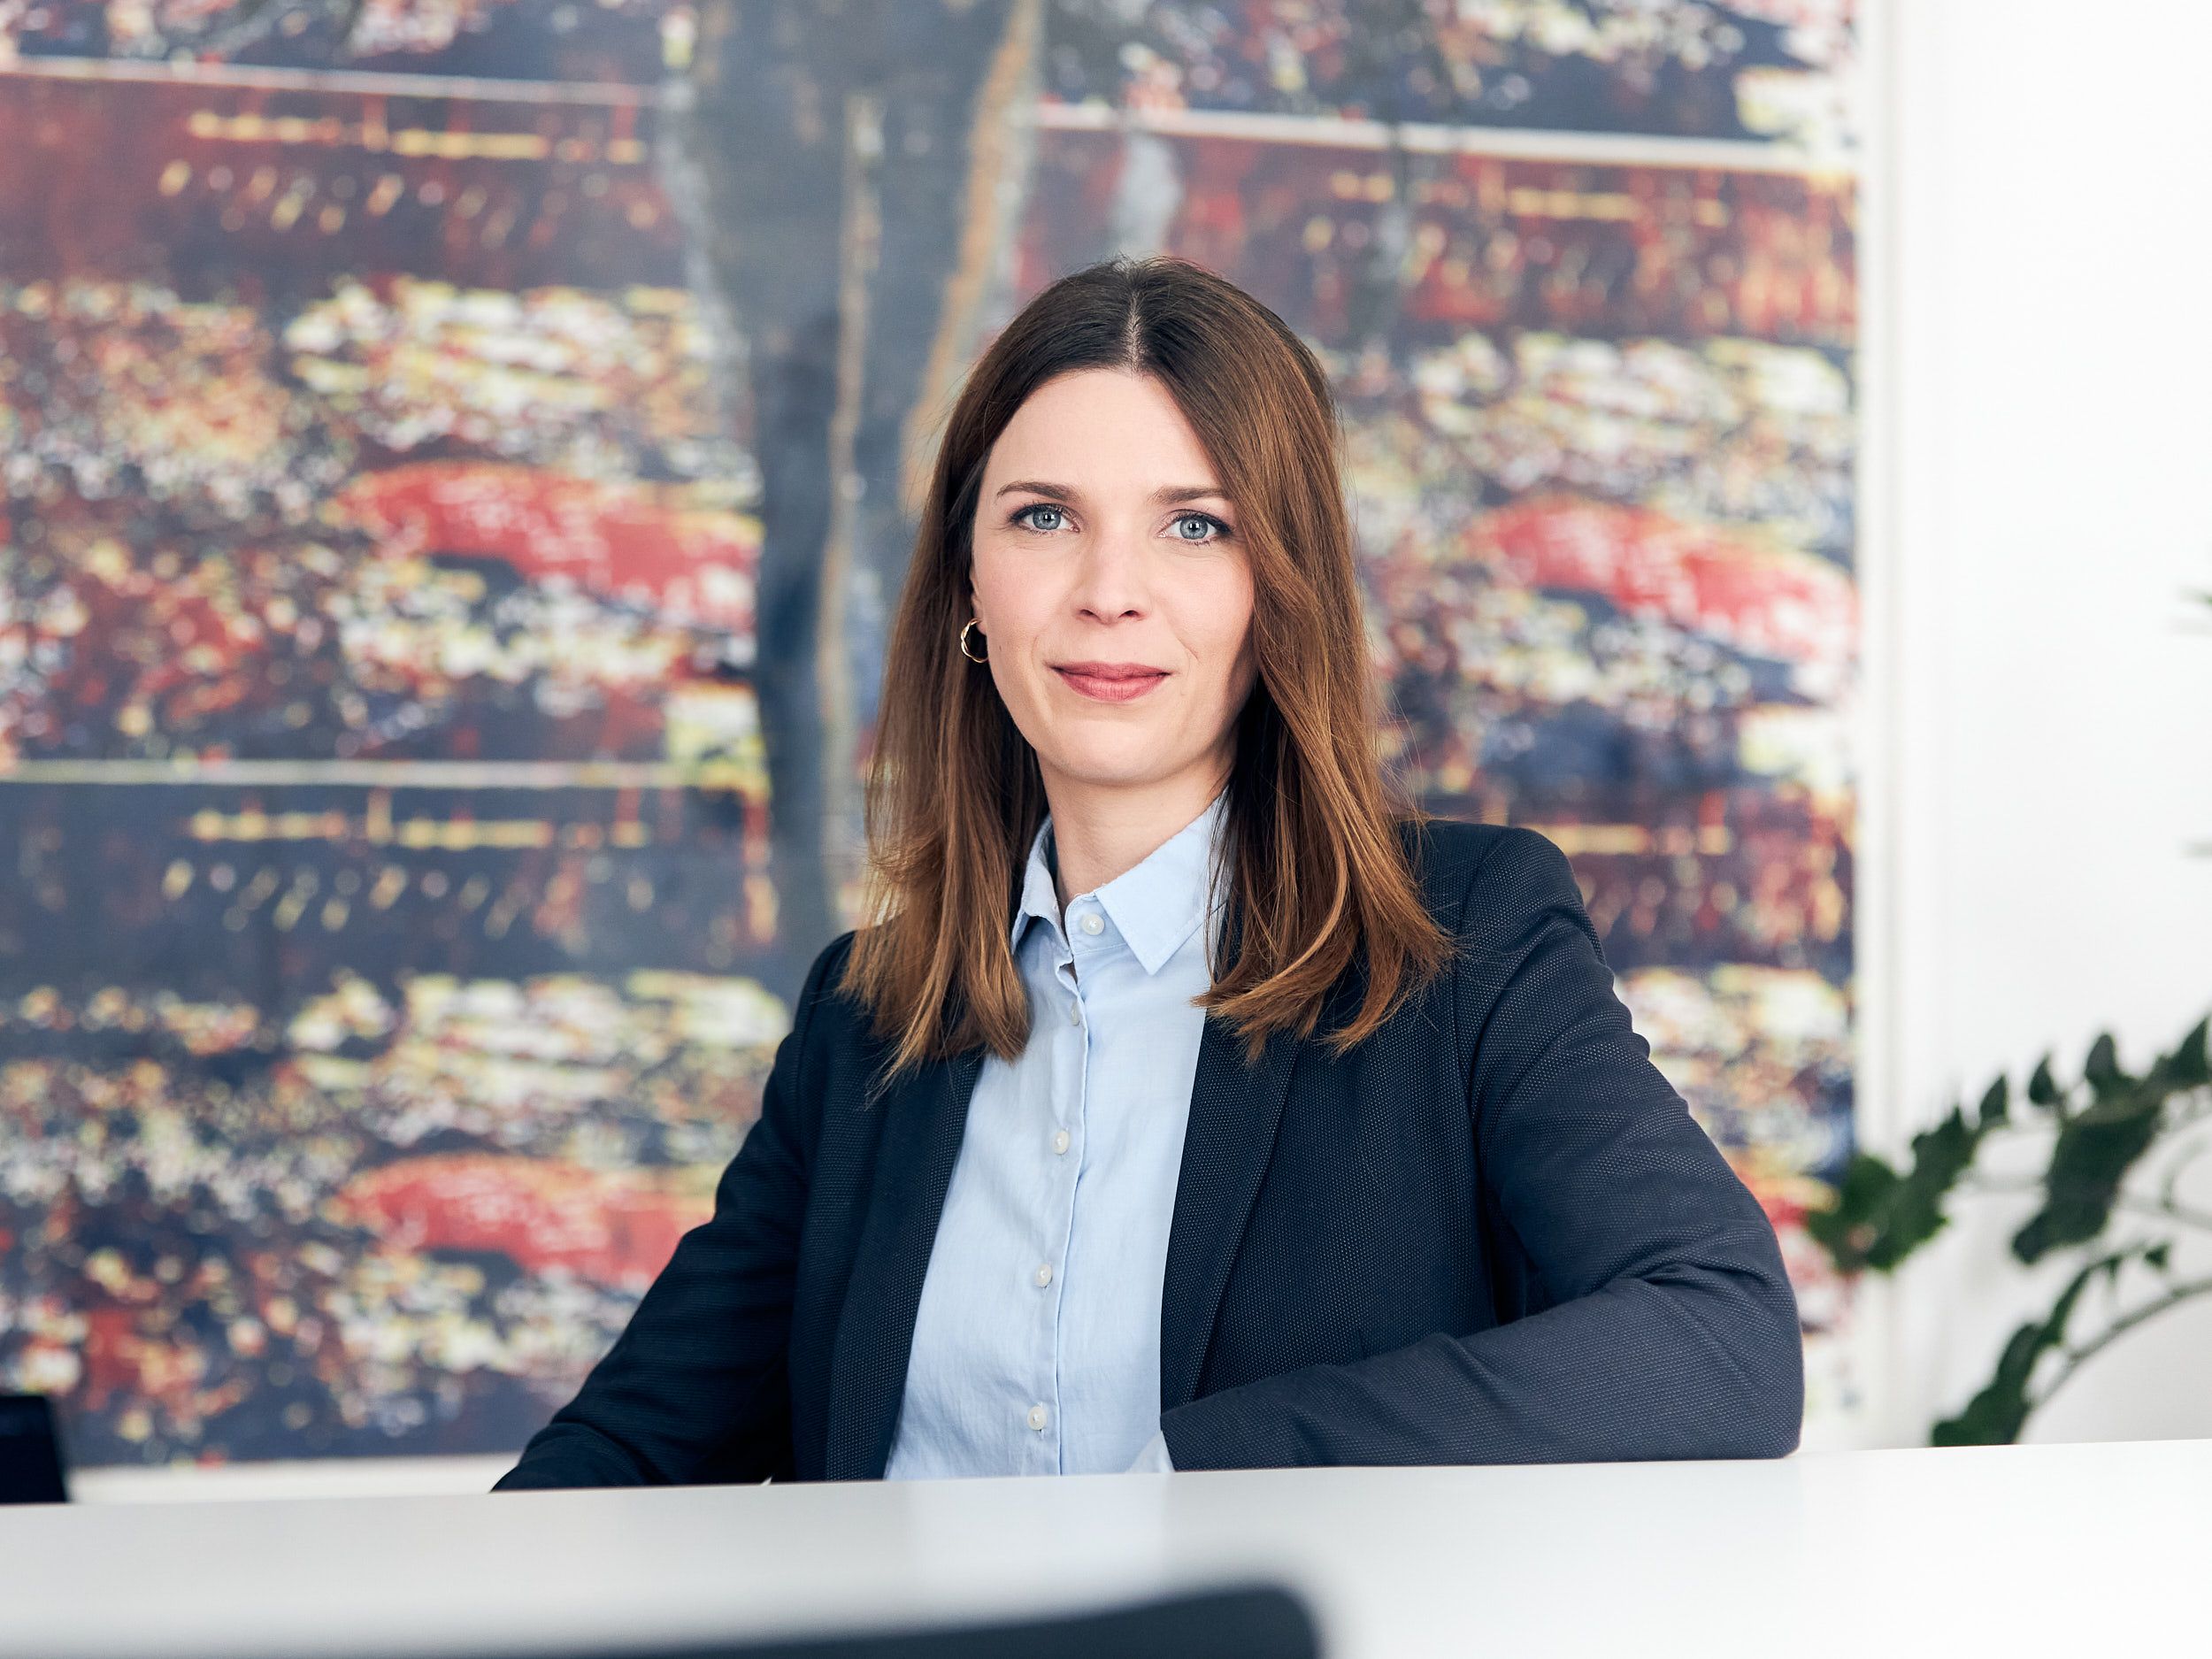 "We will see an increase in insolvency cases by mid of year 2021.", predicts Carina Küffen